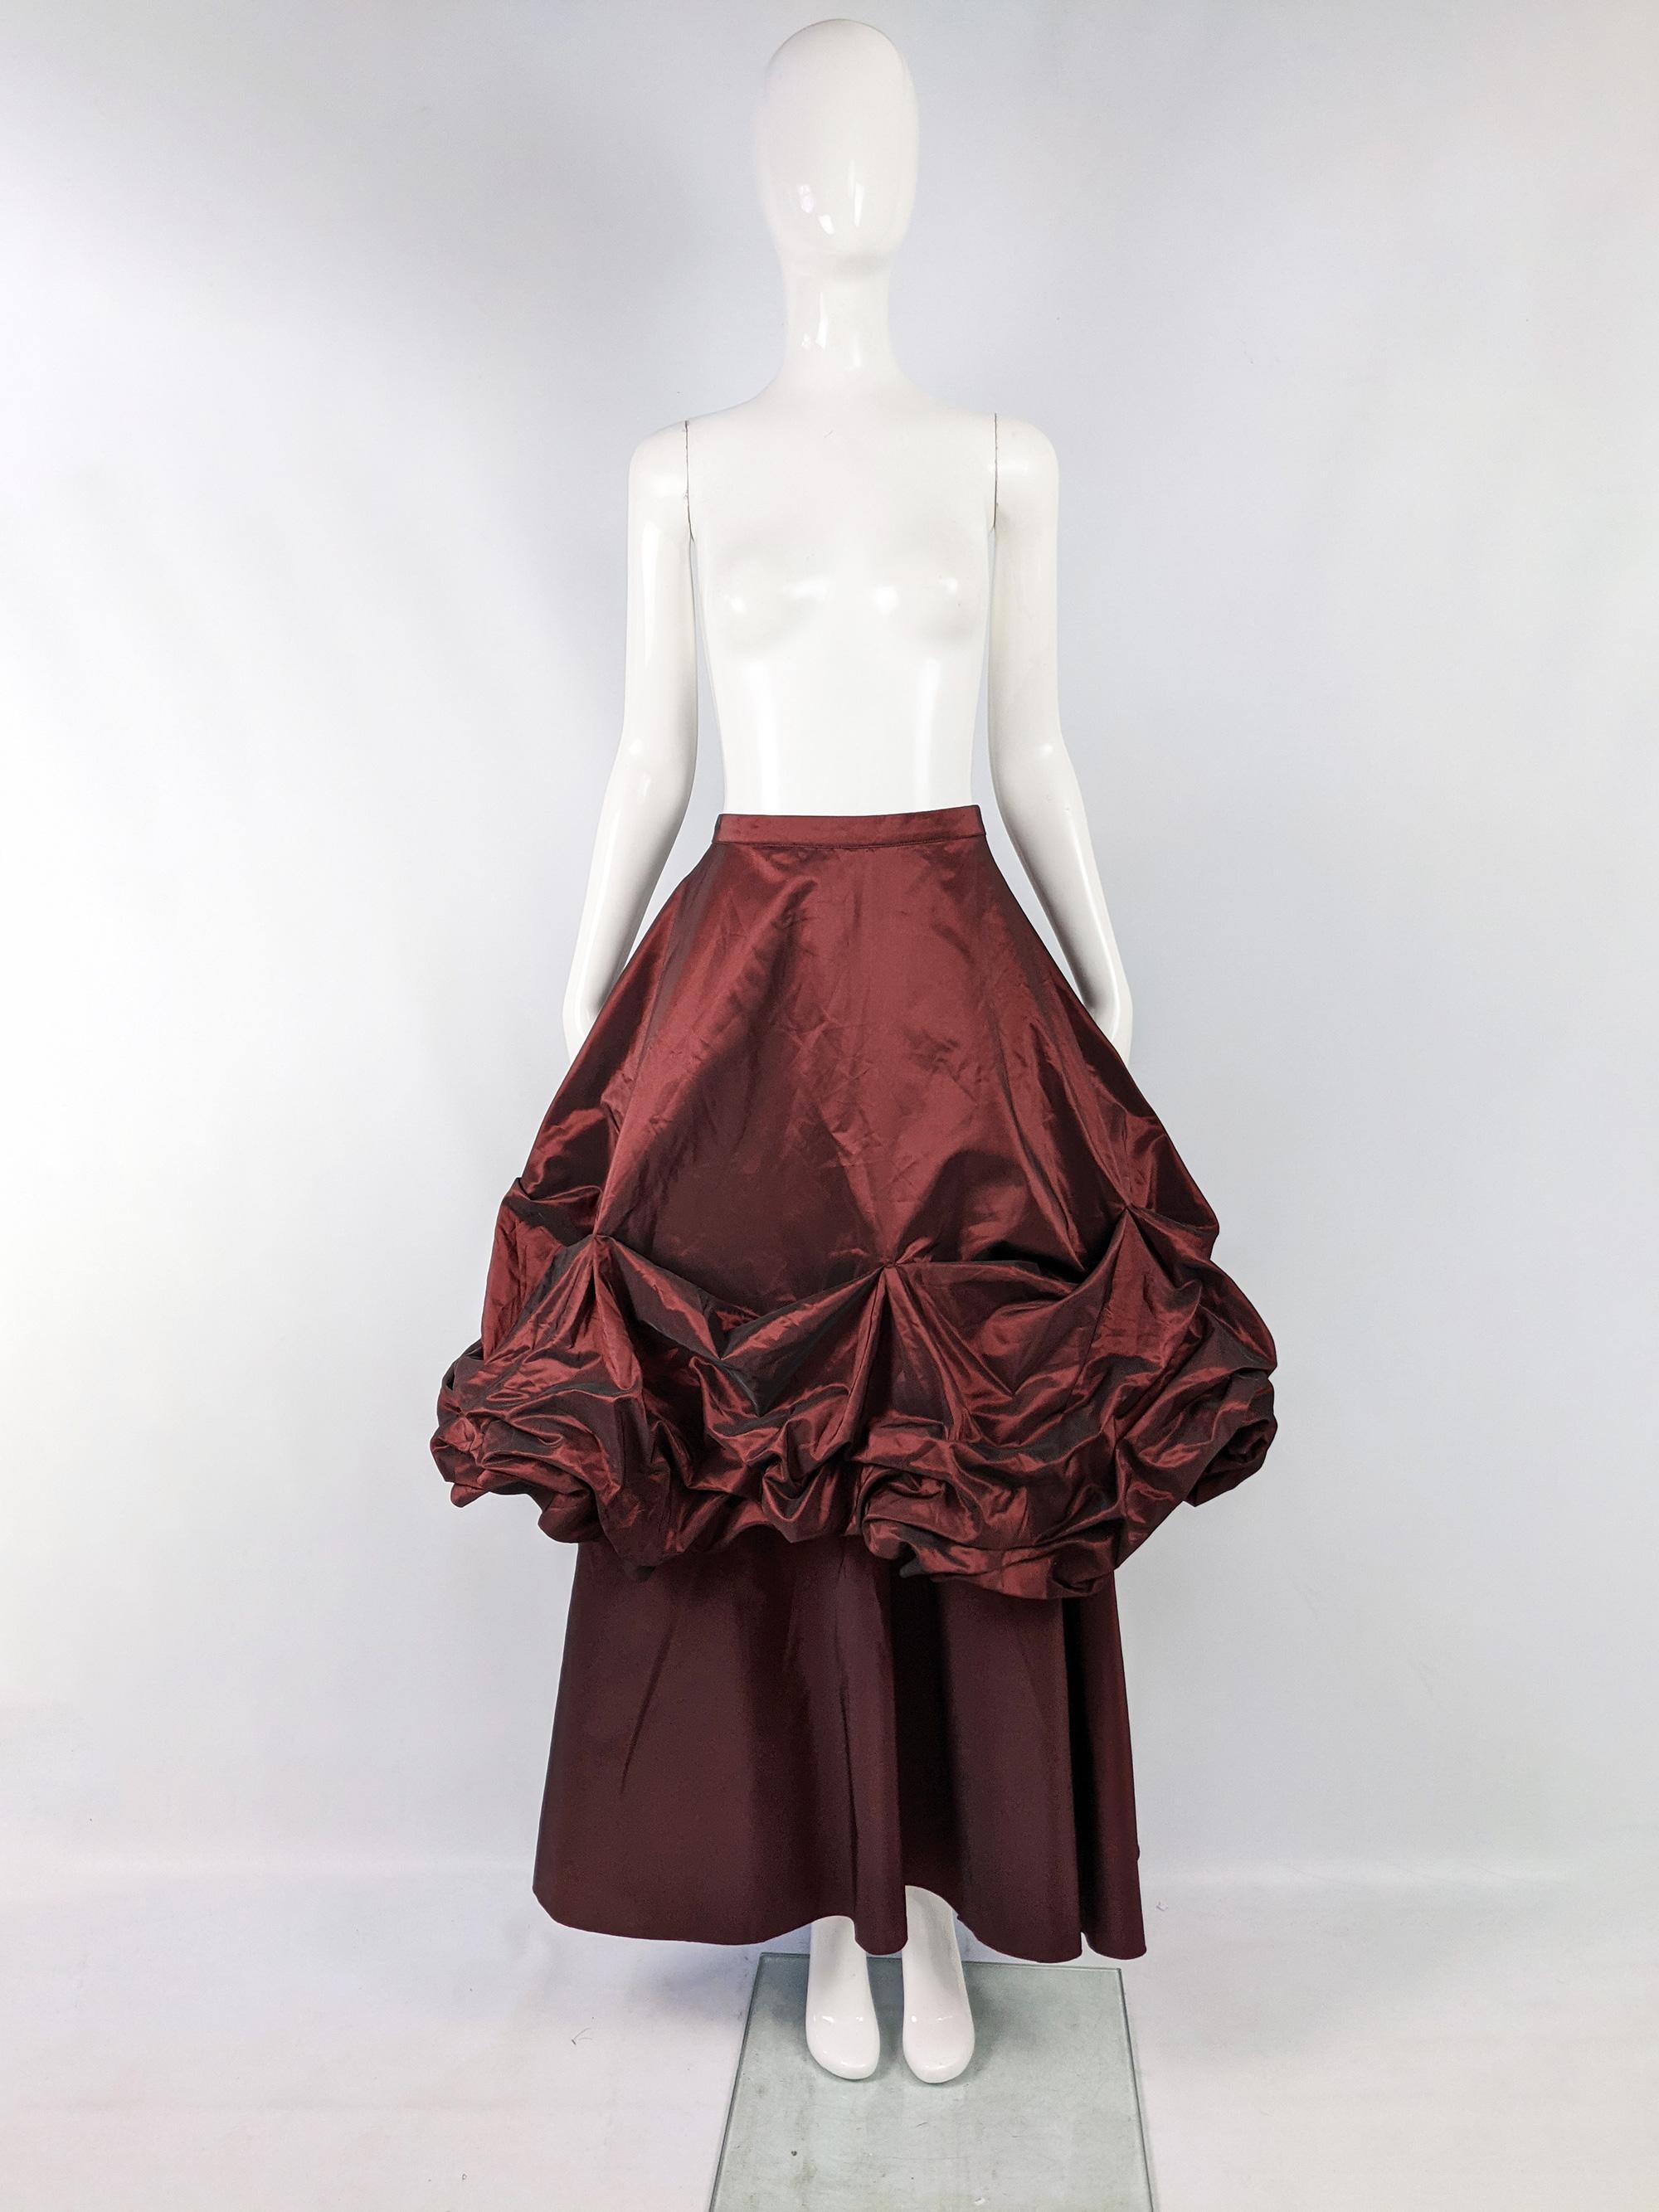 An absolutely incredible vintage womens maxi length evening skirt from the 80s in a red iridescent taffeta fabric with an incredible ruched huge top skirt over a long A line skirt. Makes a dramatic, avant garde statement at any formal party. 

Size: